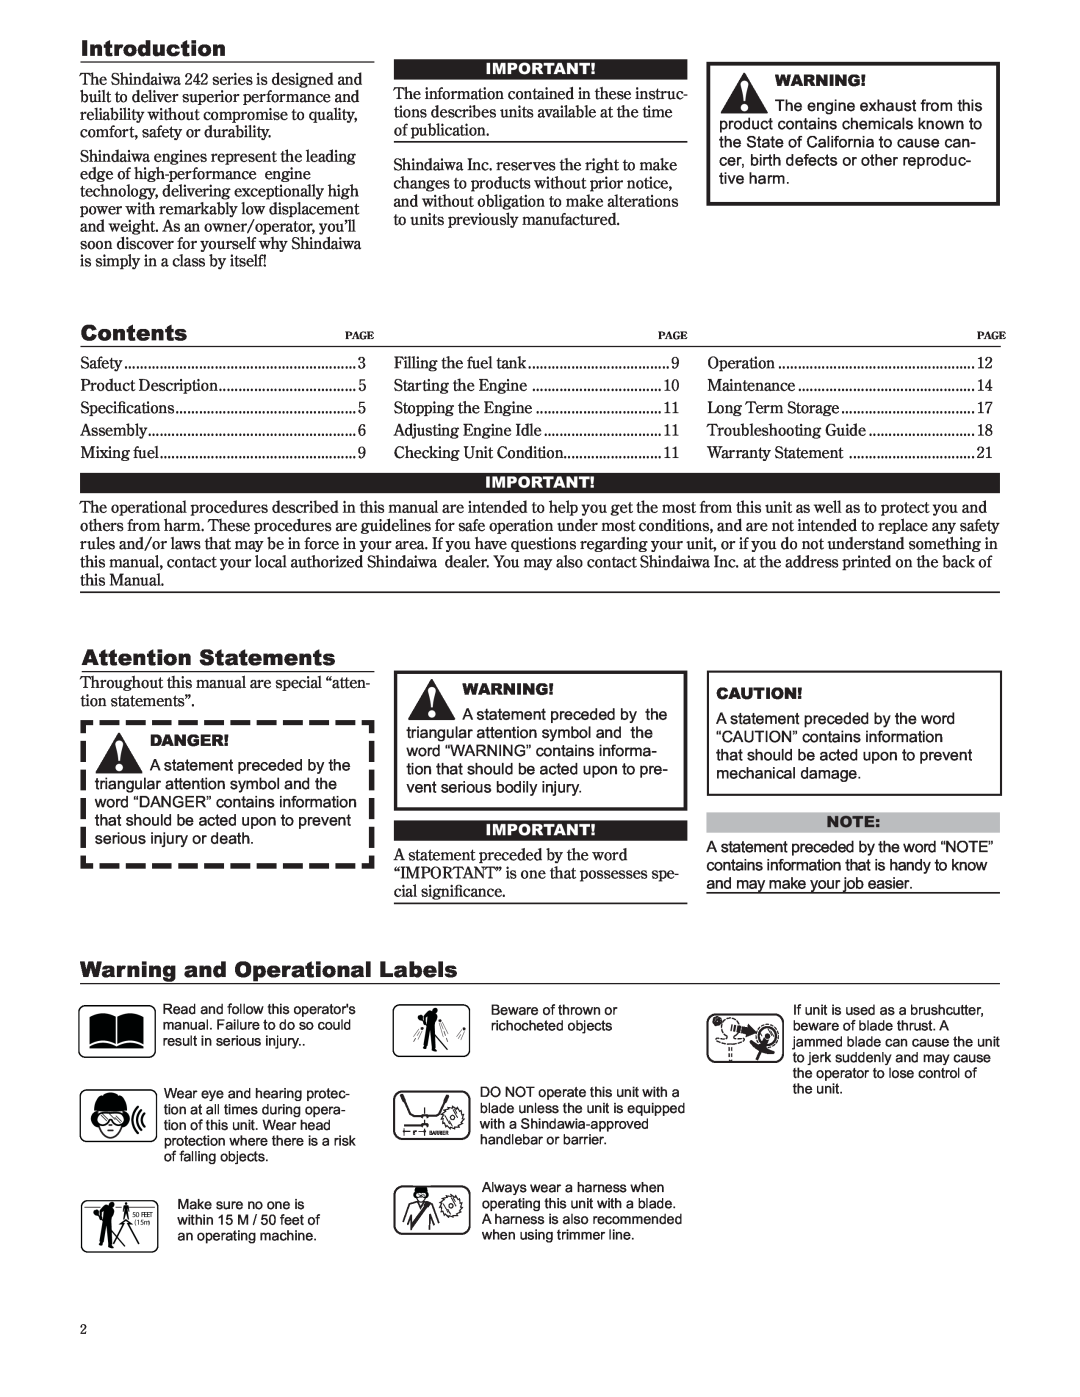 Shindaiwa 89302, C242/EVC manual Introduction, Contents, Attention Statements, Warning and Operational Labels, Danger 